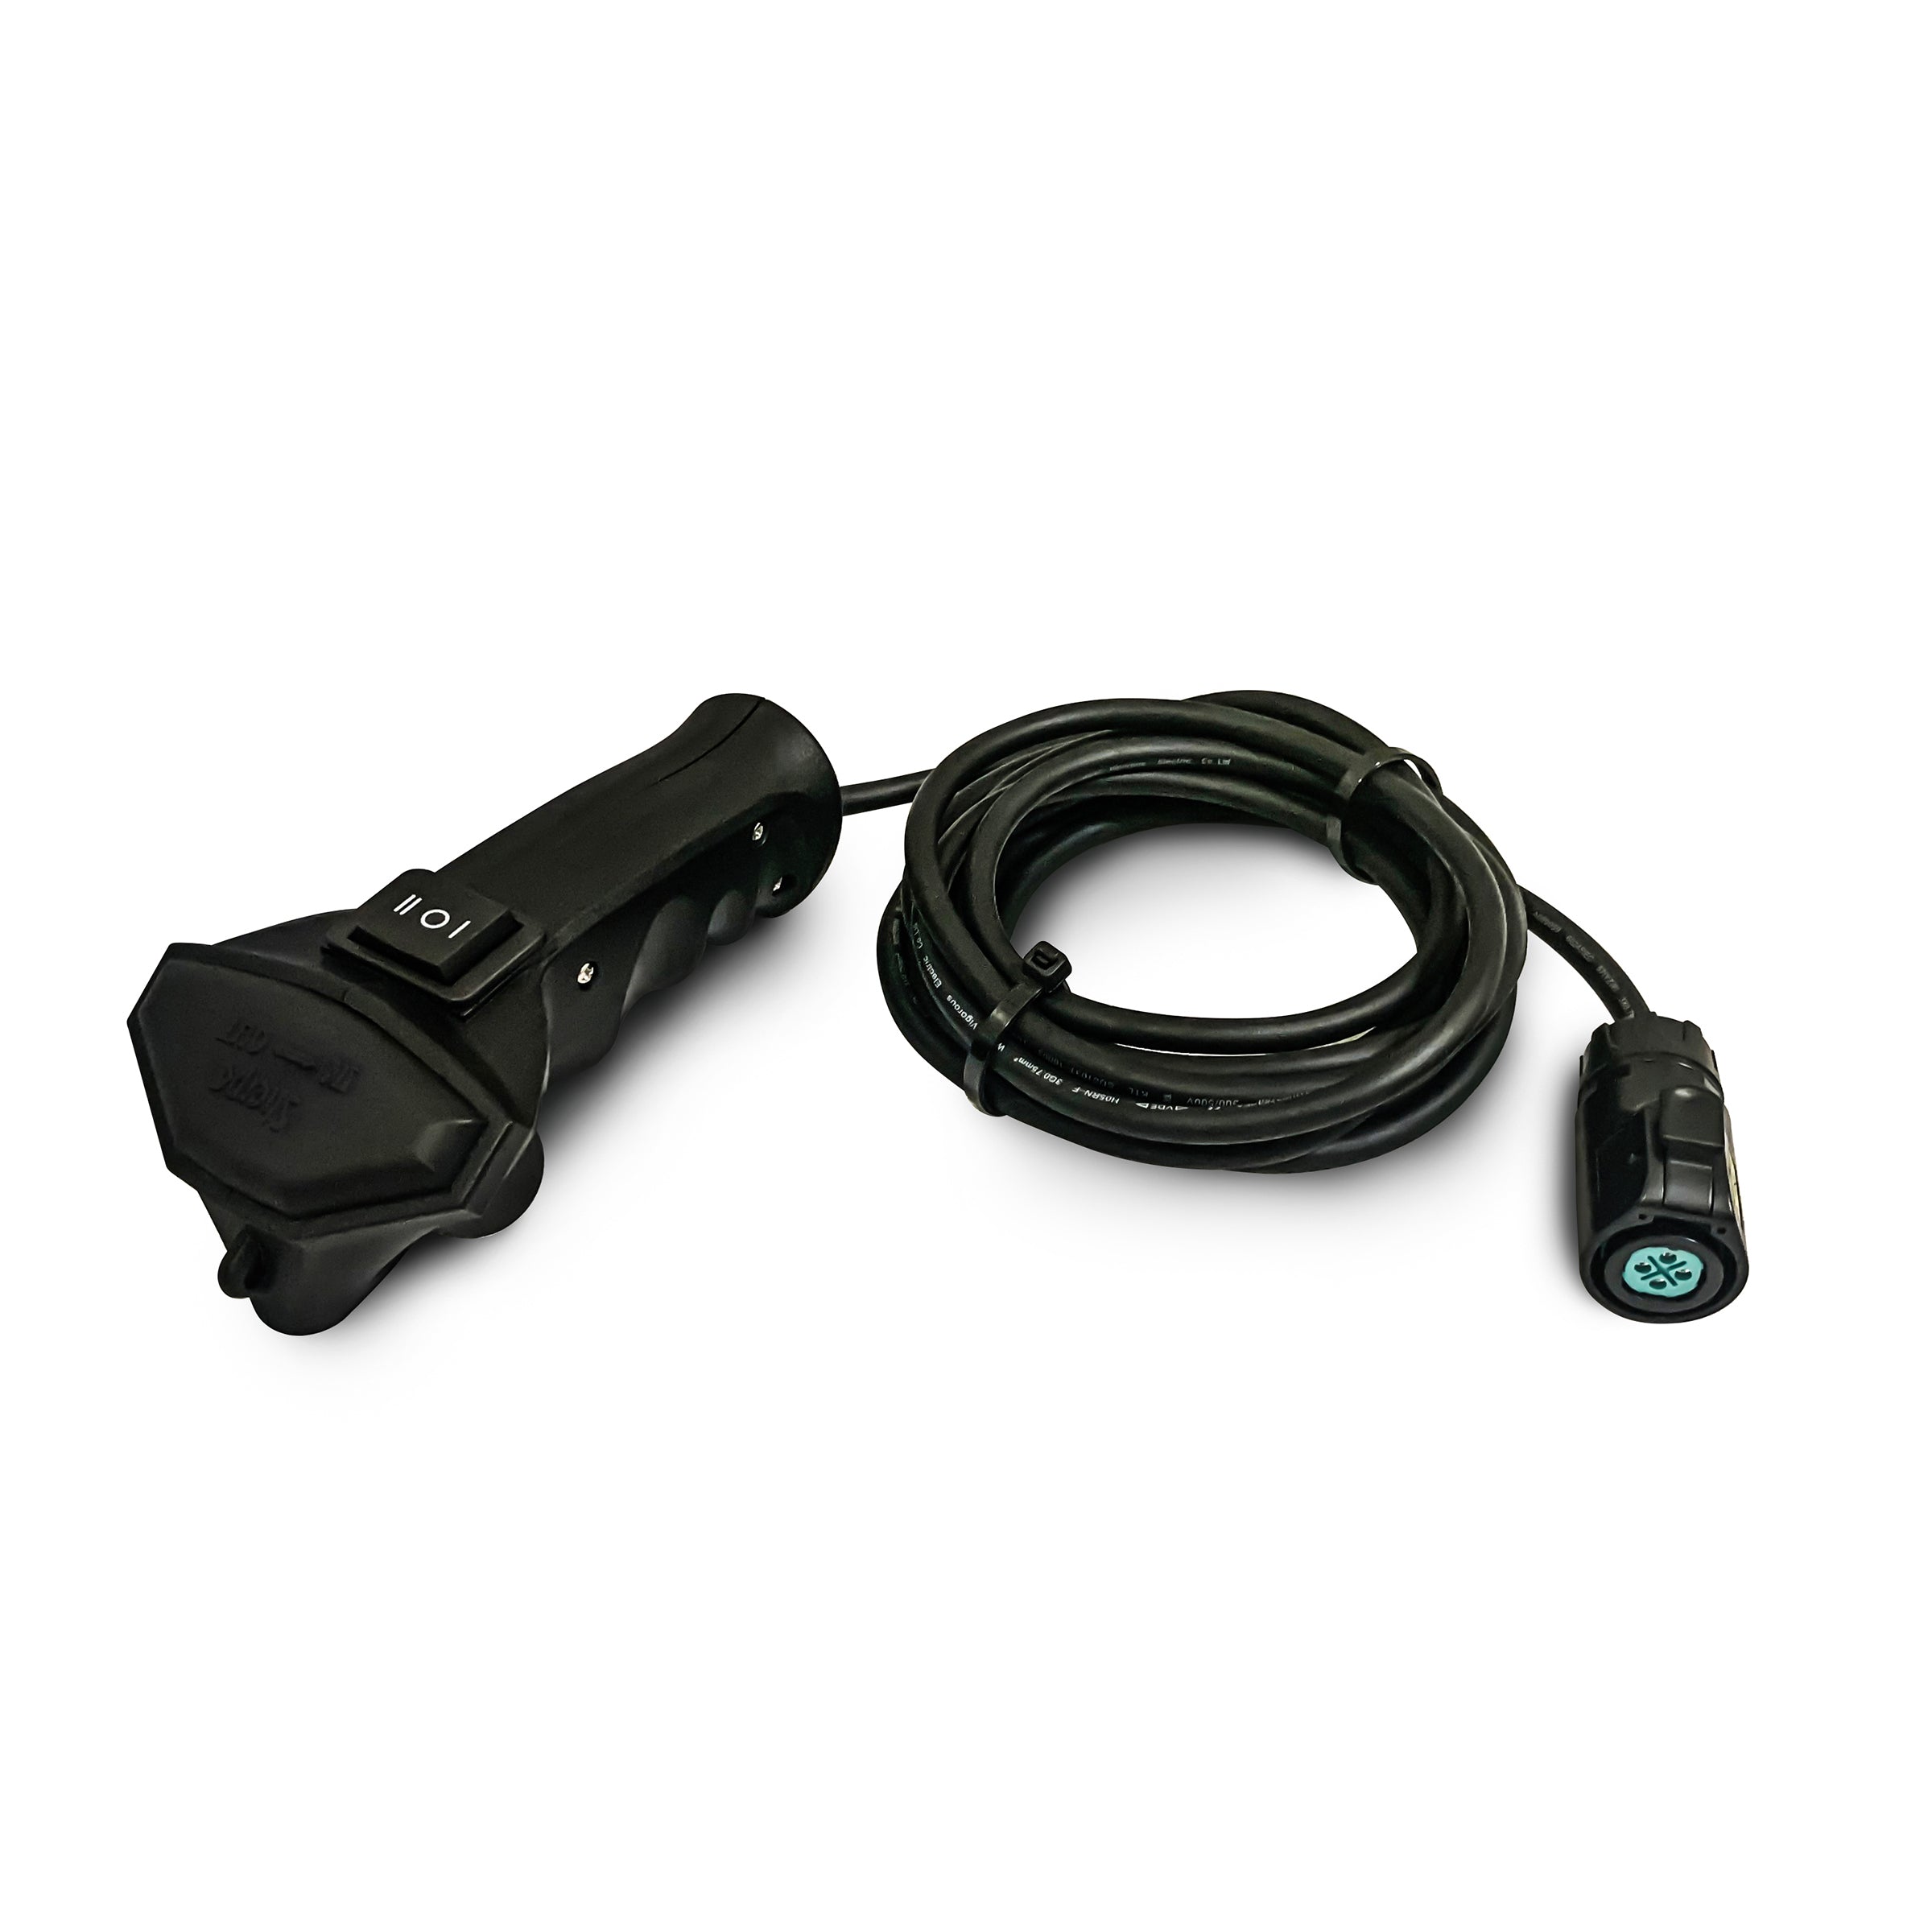 Sherpa winch controller molded post 2020